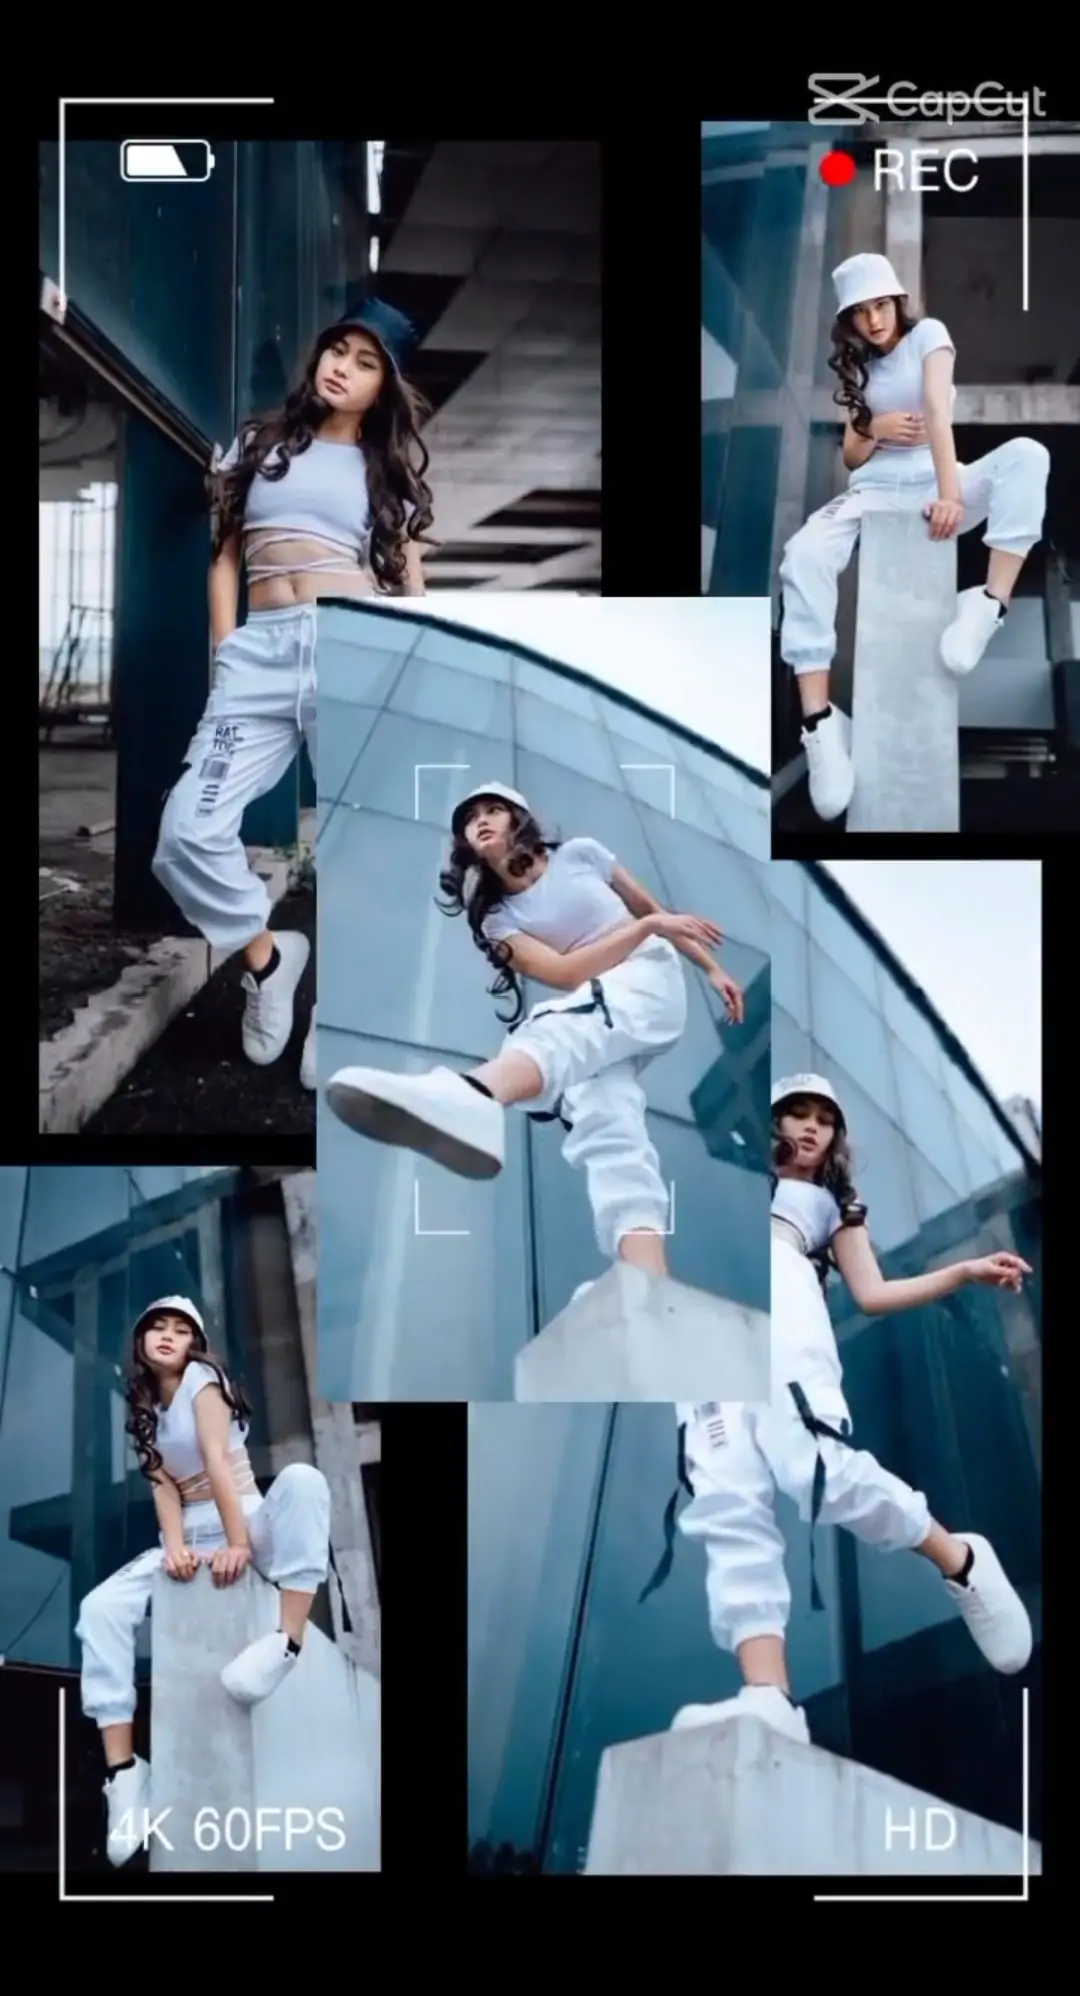 Screenshot of a video edit using the Beat 5/5 ANH CapCut Template featuring a young woman in a hip-hop inspired outfit. The video is divided into four panels showing different poses of the woman dancing or posing stylishly. In the top-left panel, she looks over her shoulder with a slight smile. The top-right panel captures her in a casual seated pose. The bottom-left panel shows her mid-dance move with one leg extended out. The bottom-right panel depicts her sitting with knees bent and hands resting on her knees. The image exudes a cool, urban vibe with a background of glass and concrete structures. Each panel has a white border, and there are indicators such as 'REC' in red text, suggesting this is a recording. Text at the bottom states '4K 60FPS' on the left and 'HD' on the right, emphasizing high video quality.